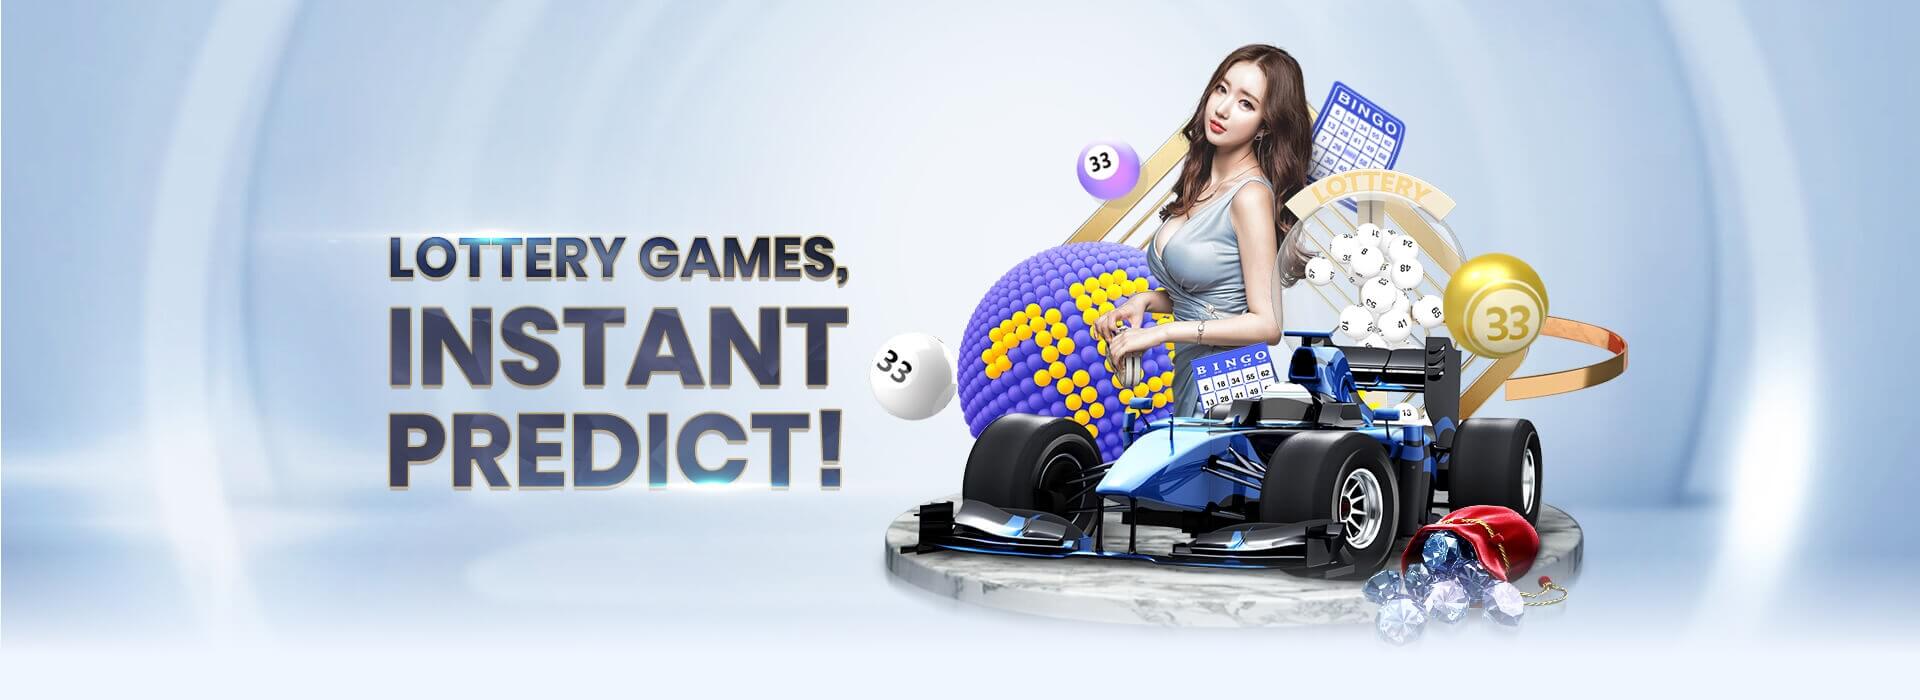 Online Lottery Games in Malaysia